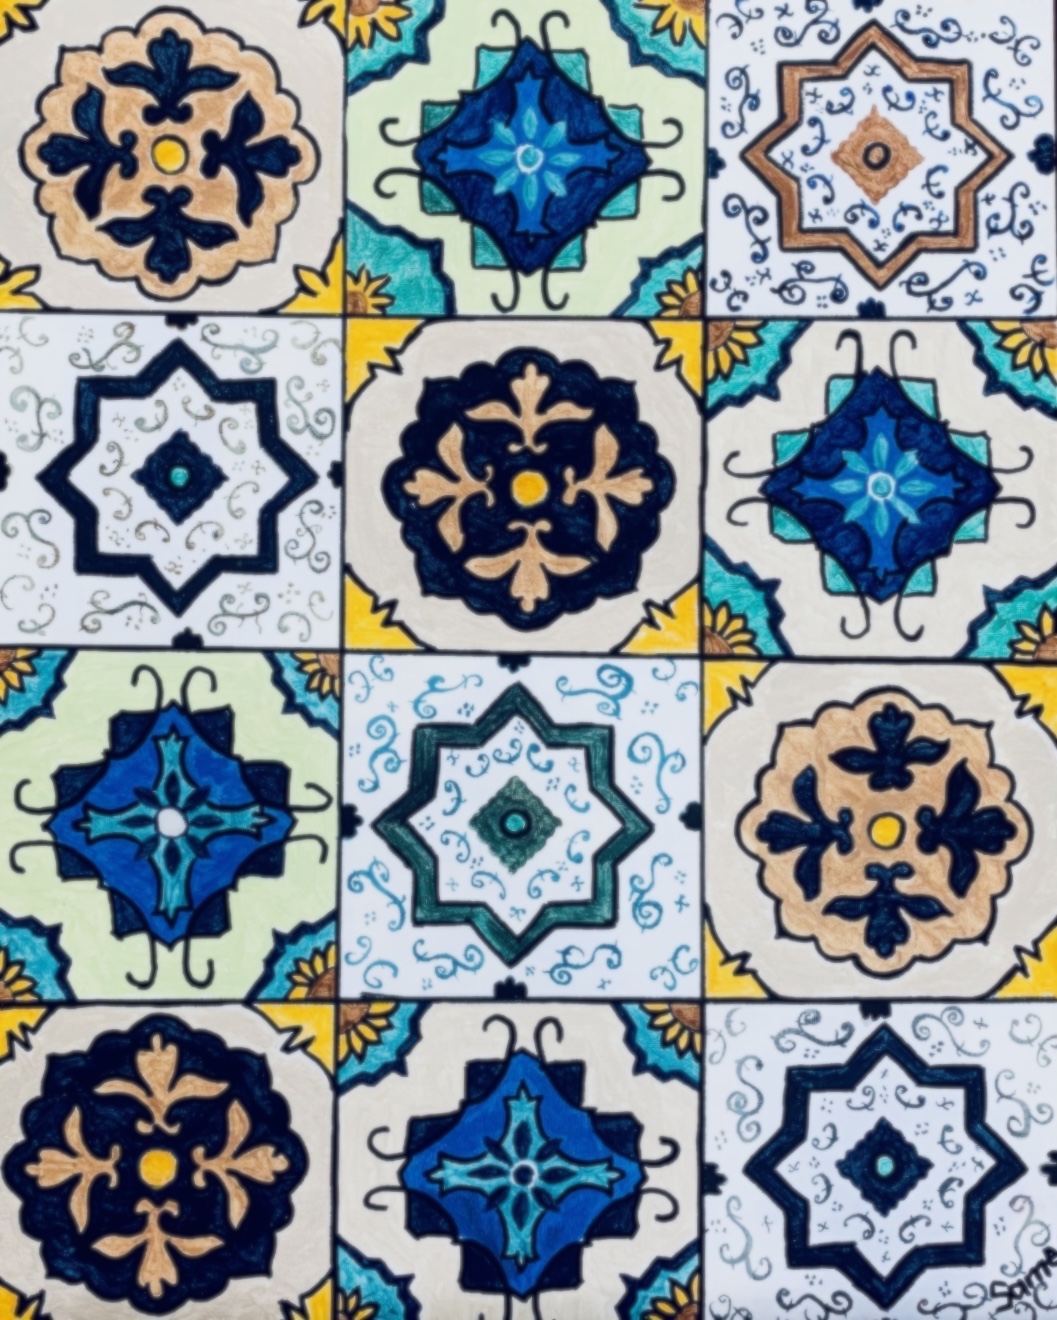 Paintings in the style of Spanish tiles